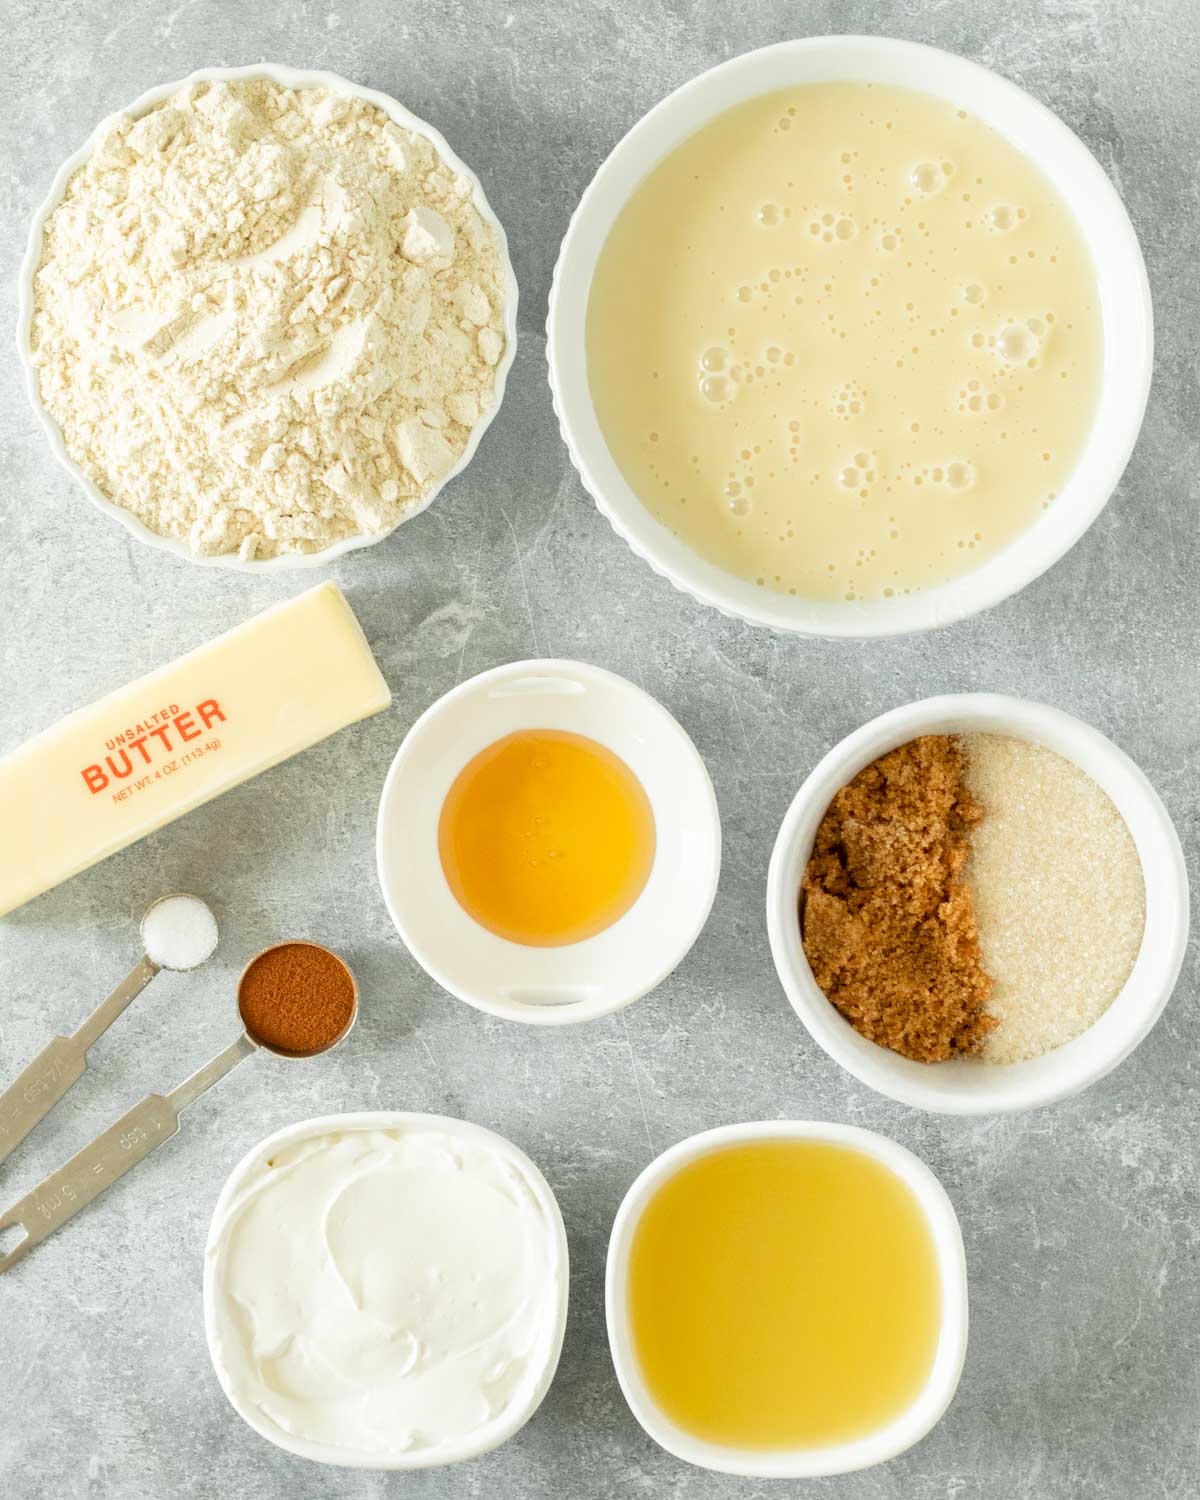 Ingredients for Key Lime Pie Bars